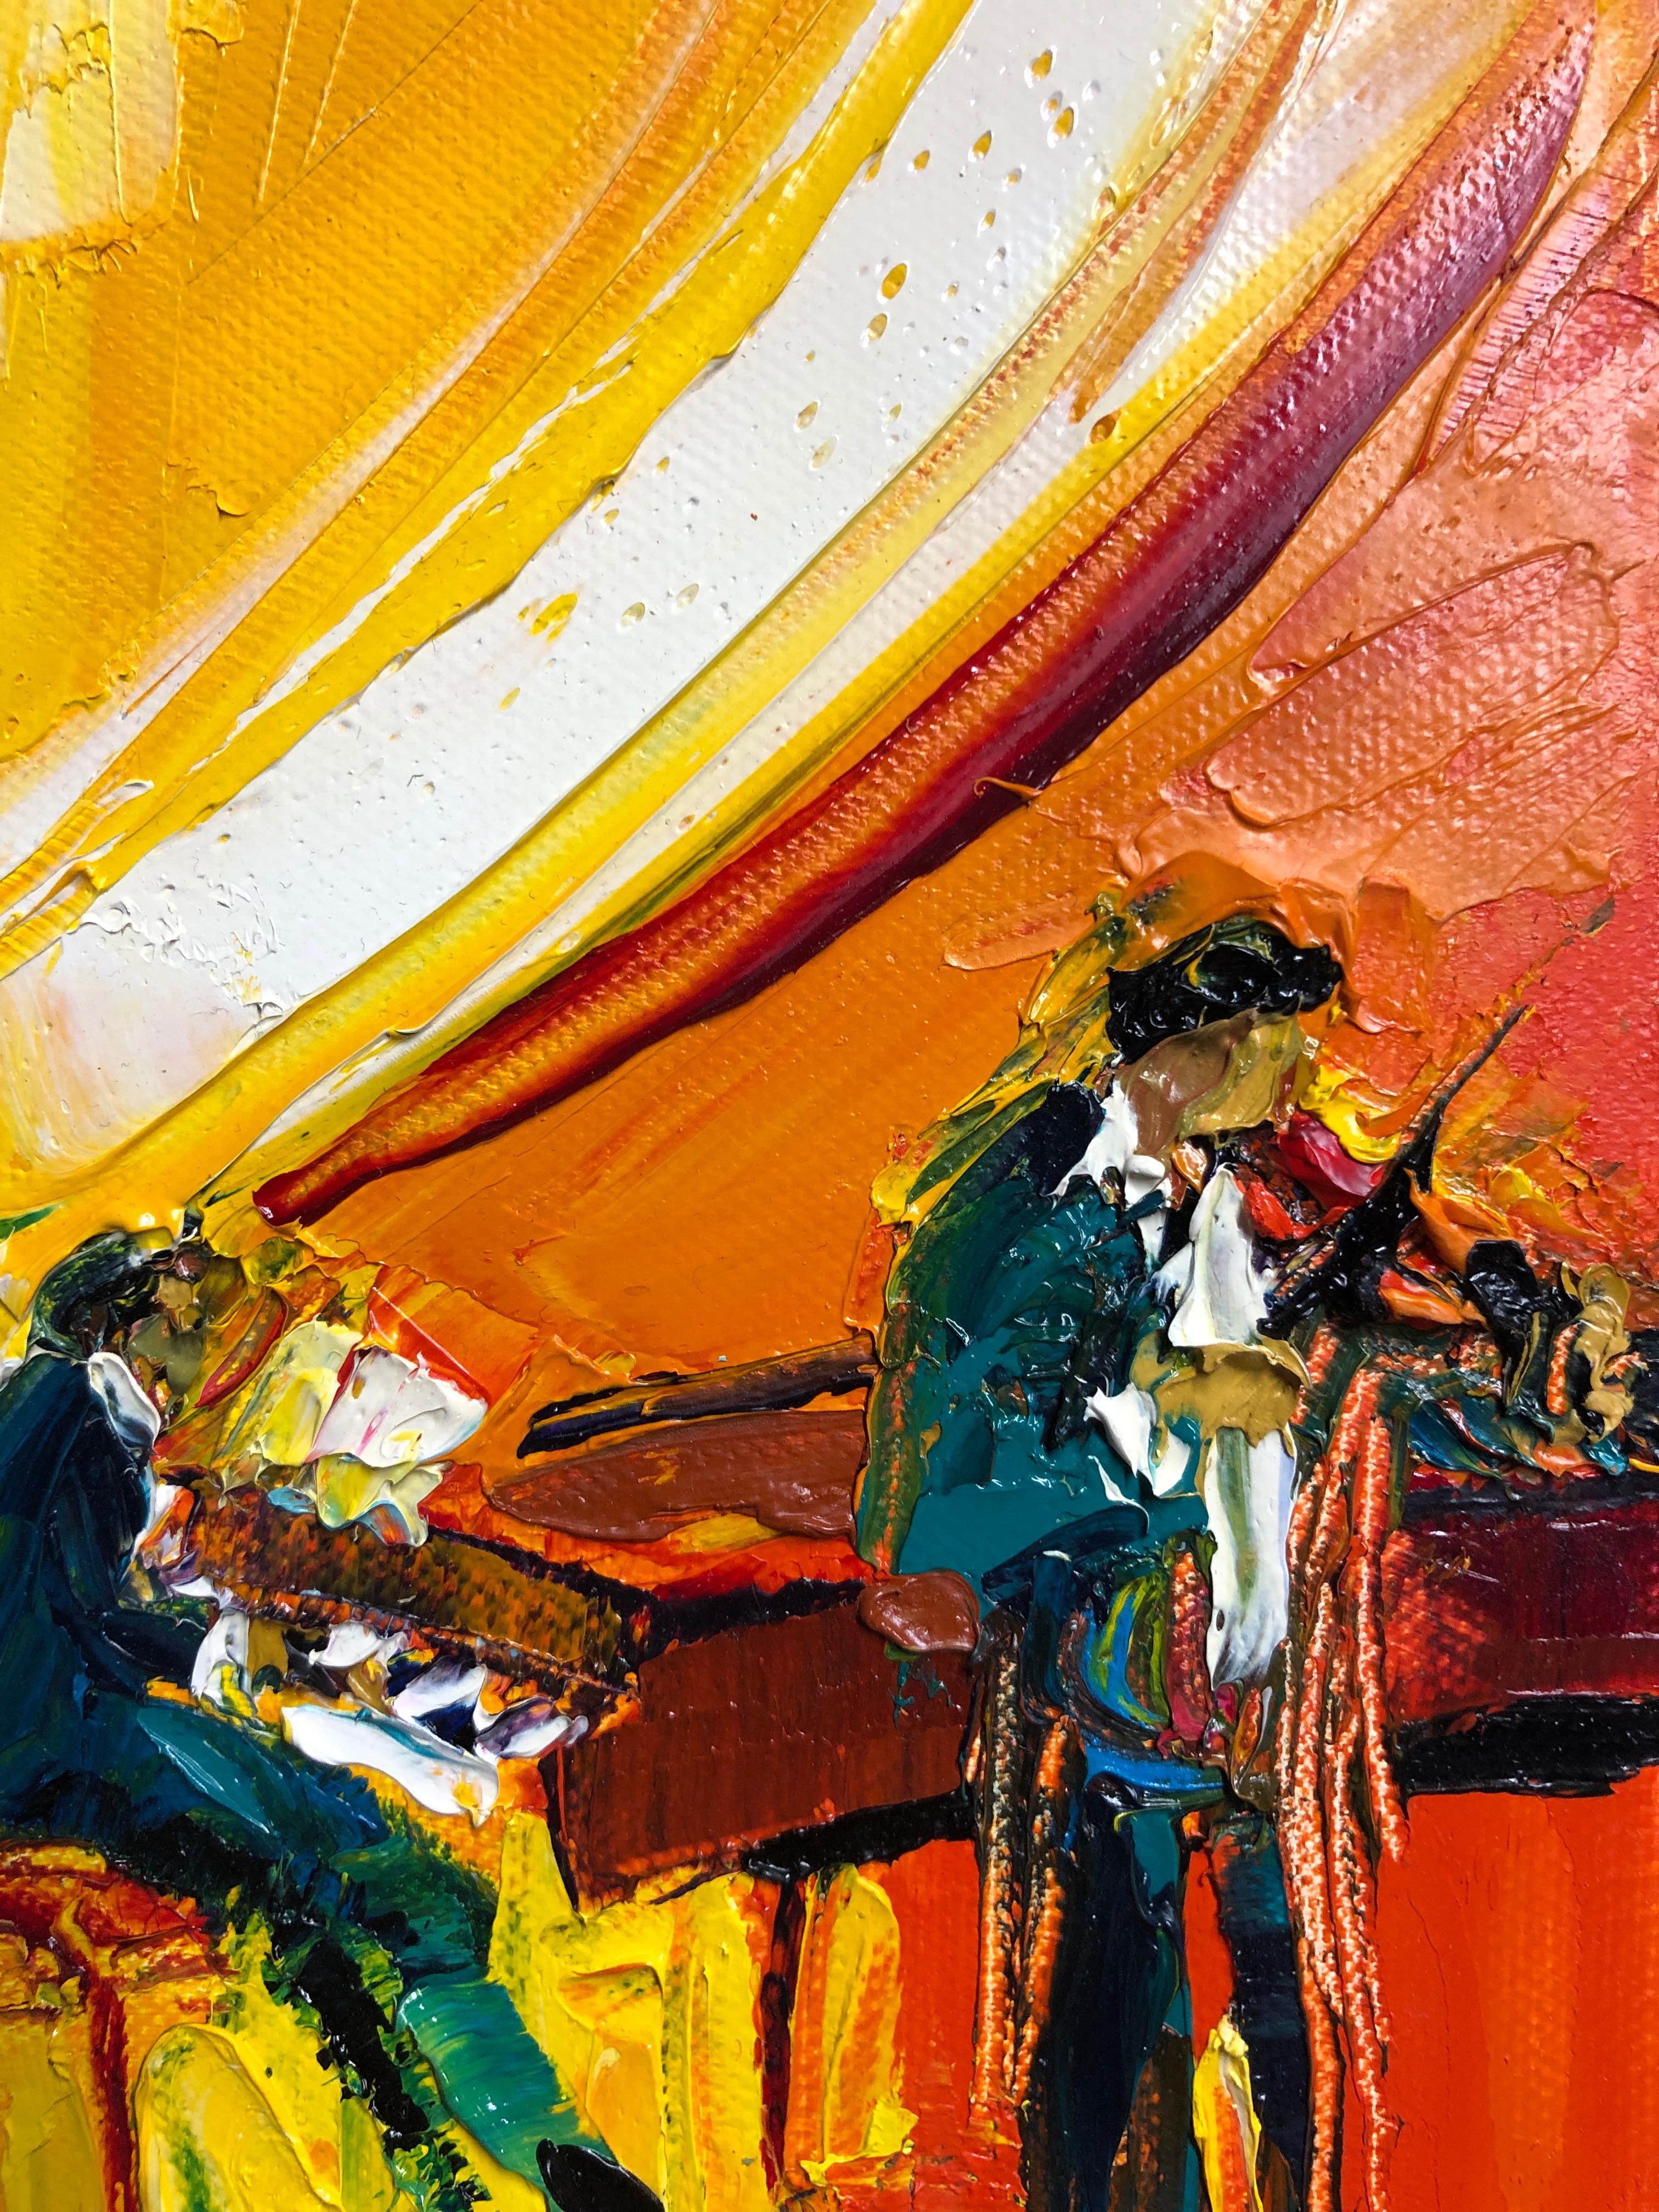 Jazz Painting Oil on Canvas Palette Knife 14 x 10